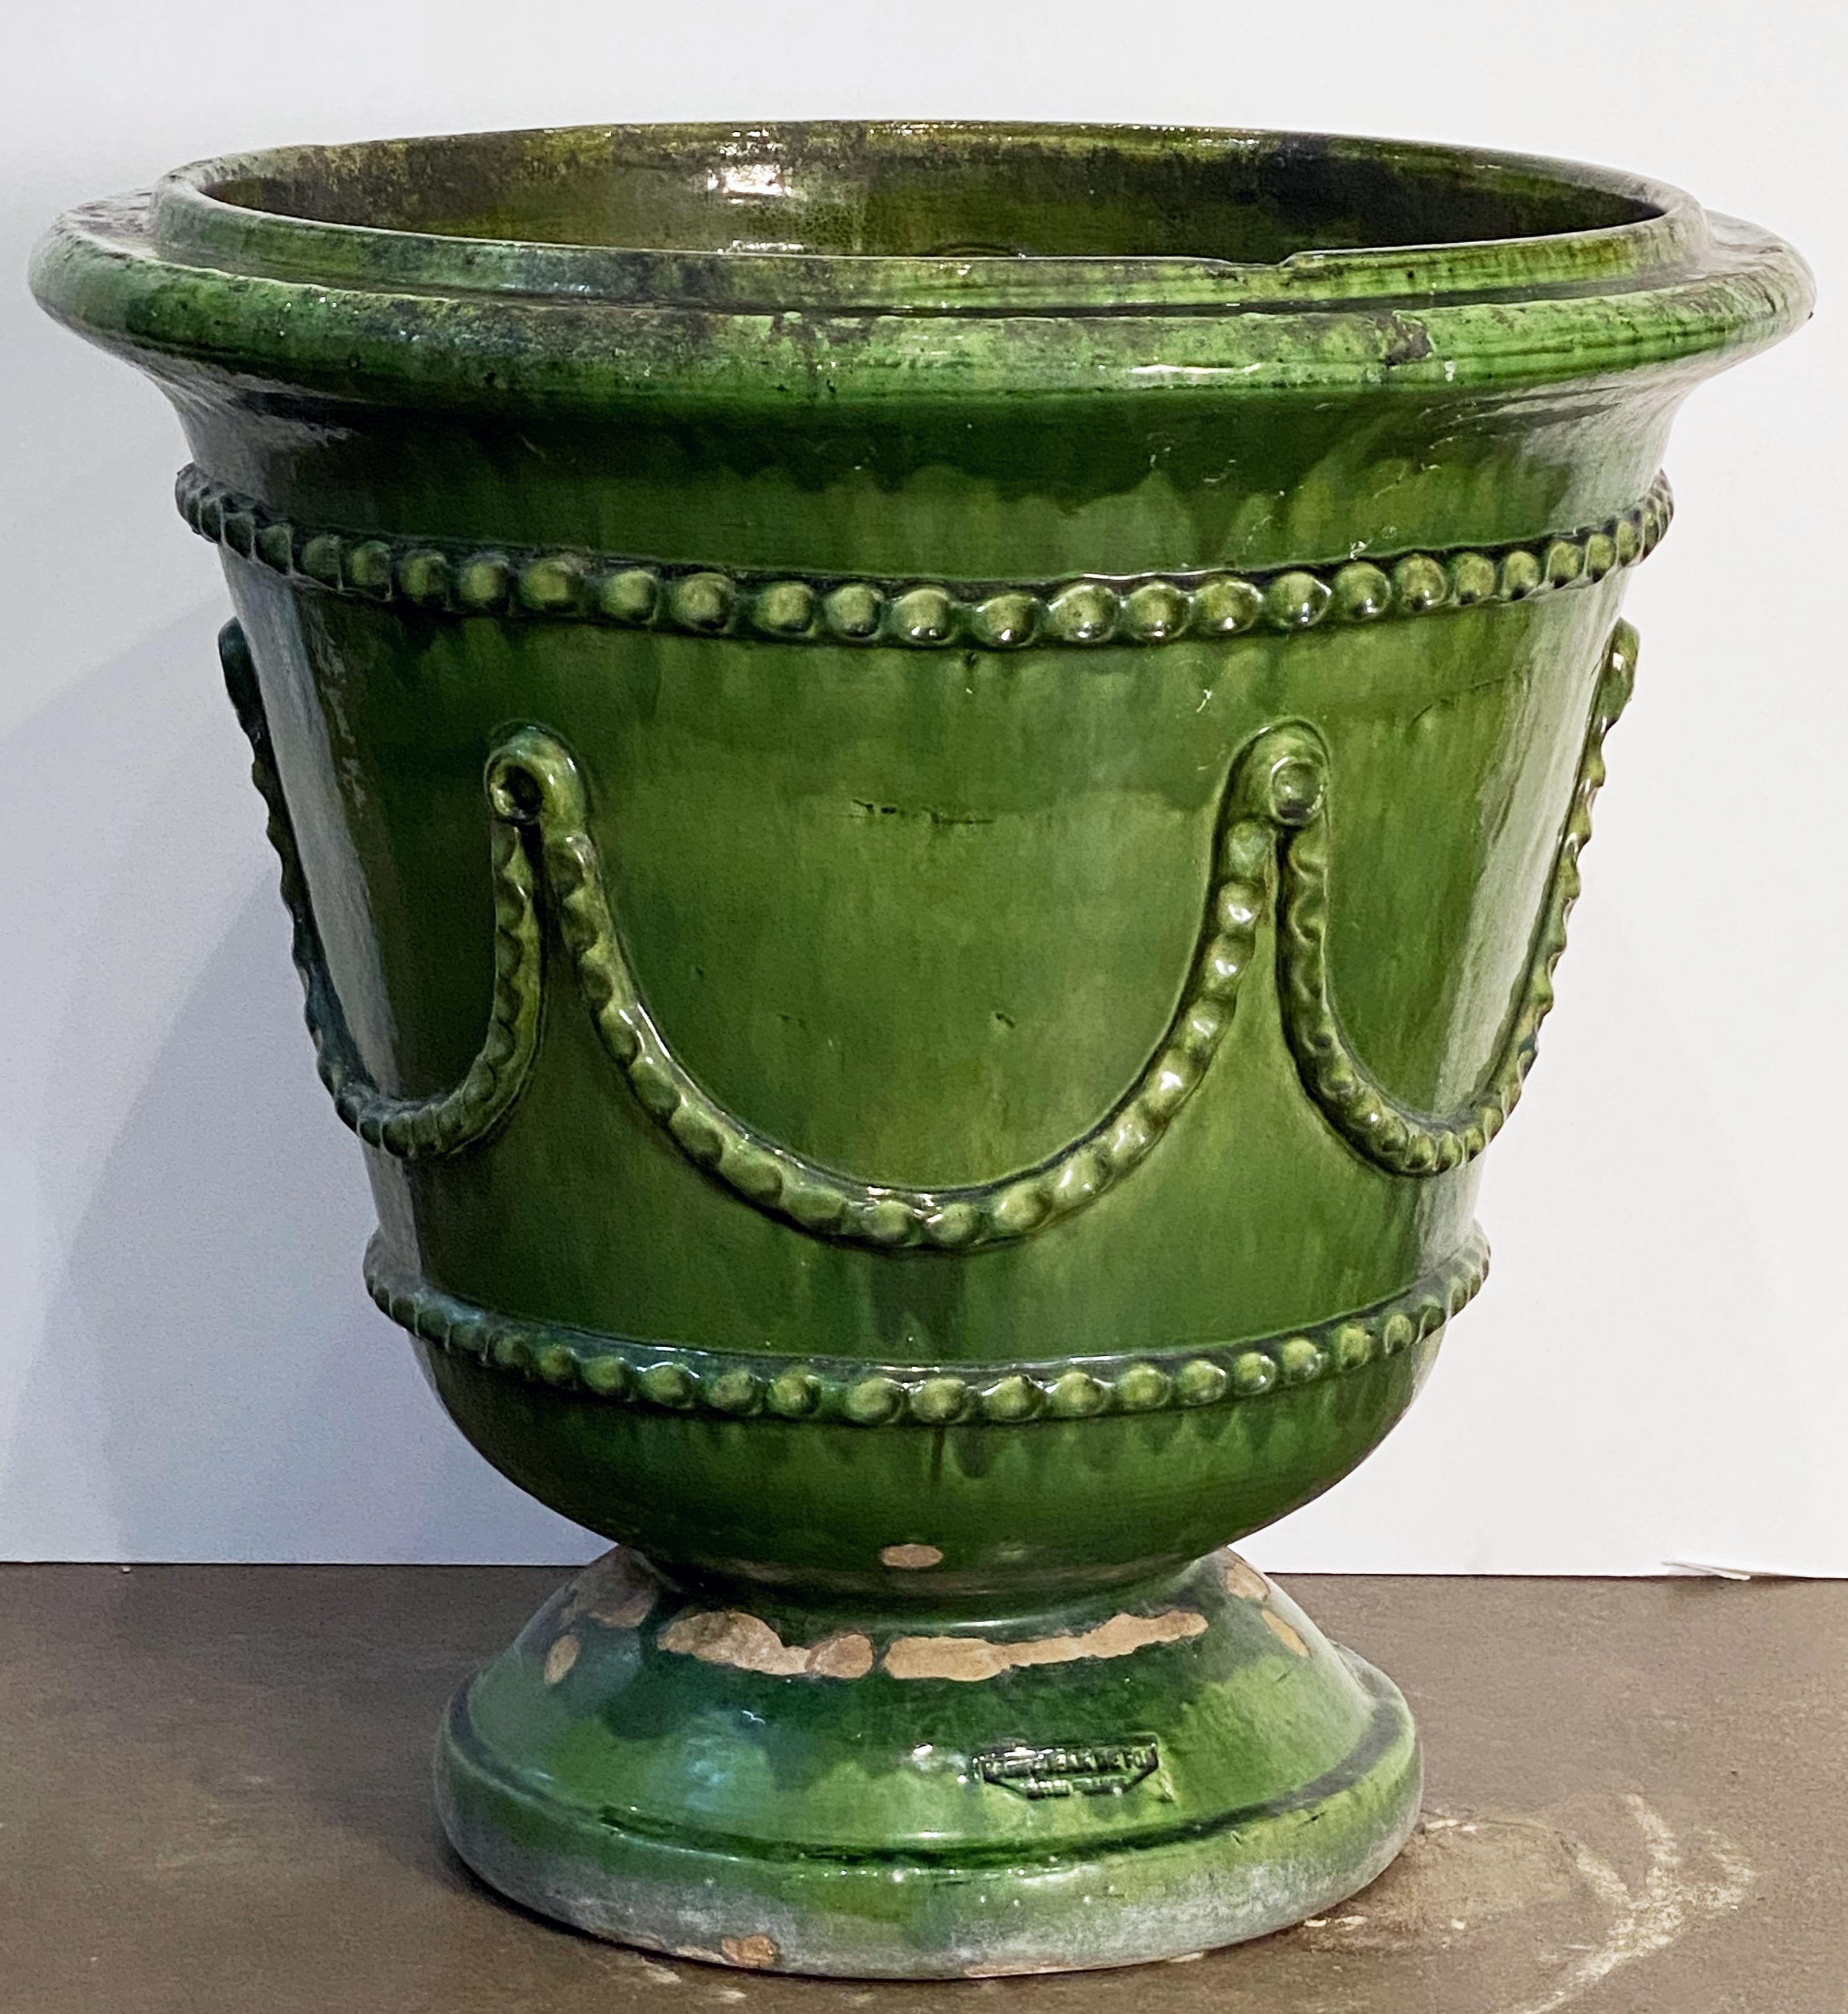 20th Century Large Glazed Earthenware Castelnaudary-Style Urn or Planter Pot from France For Sale